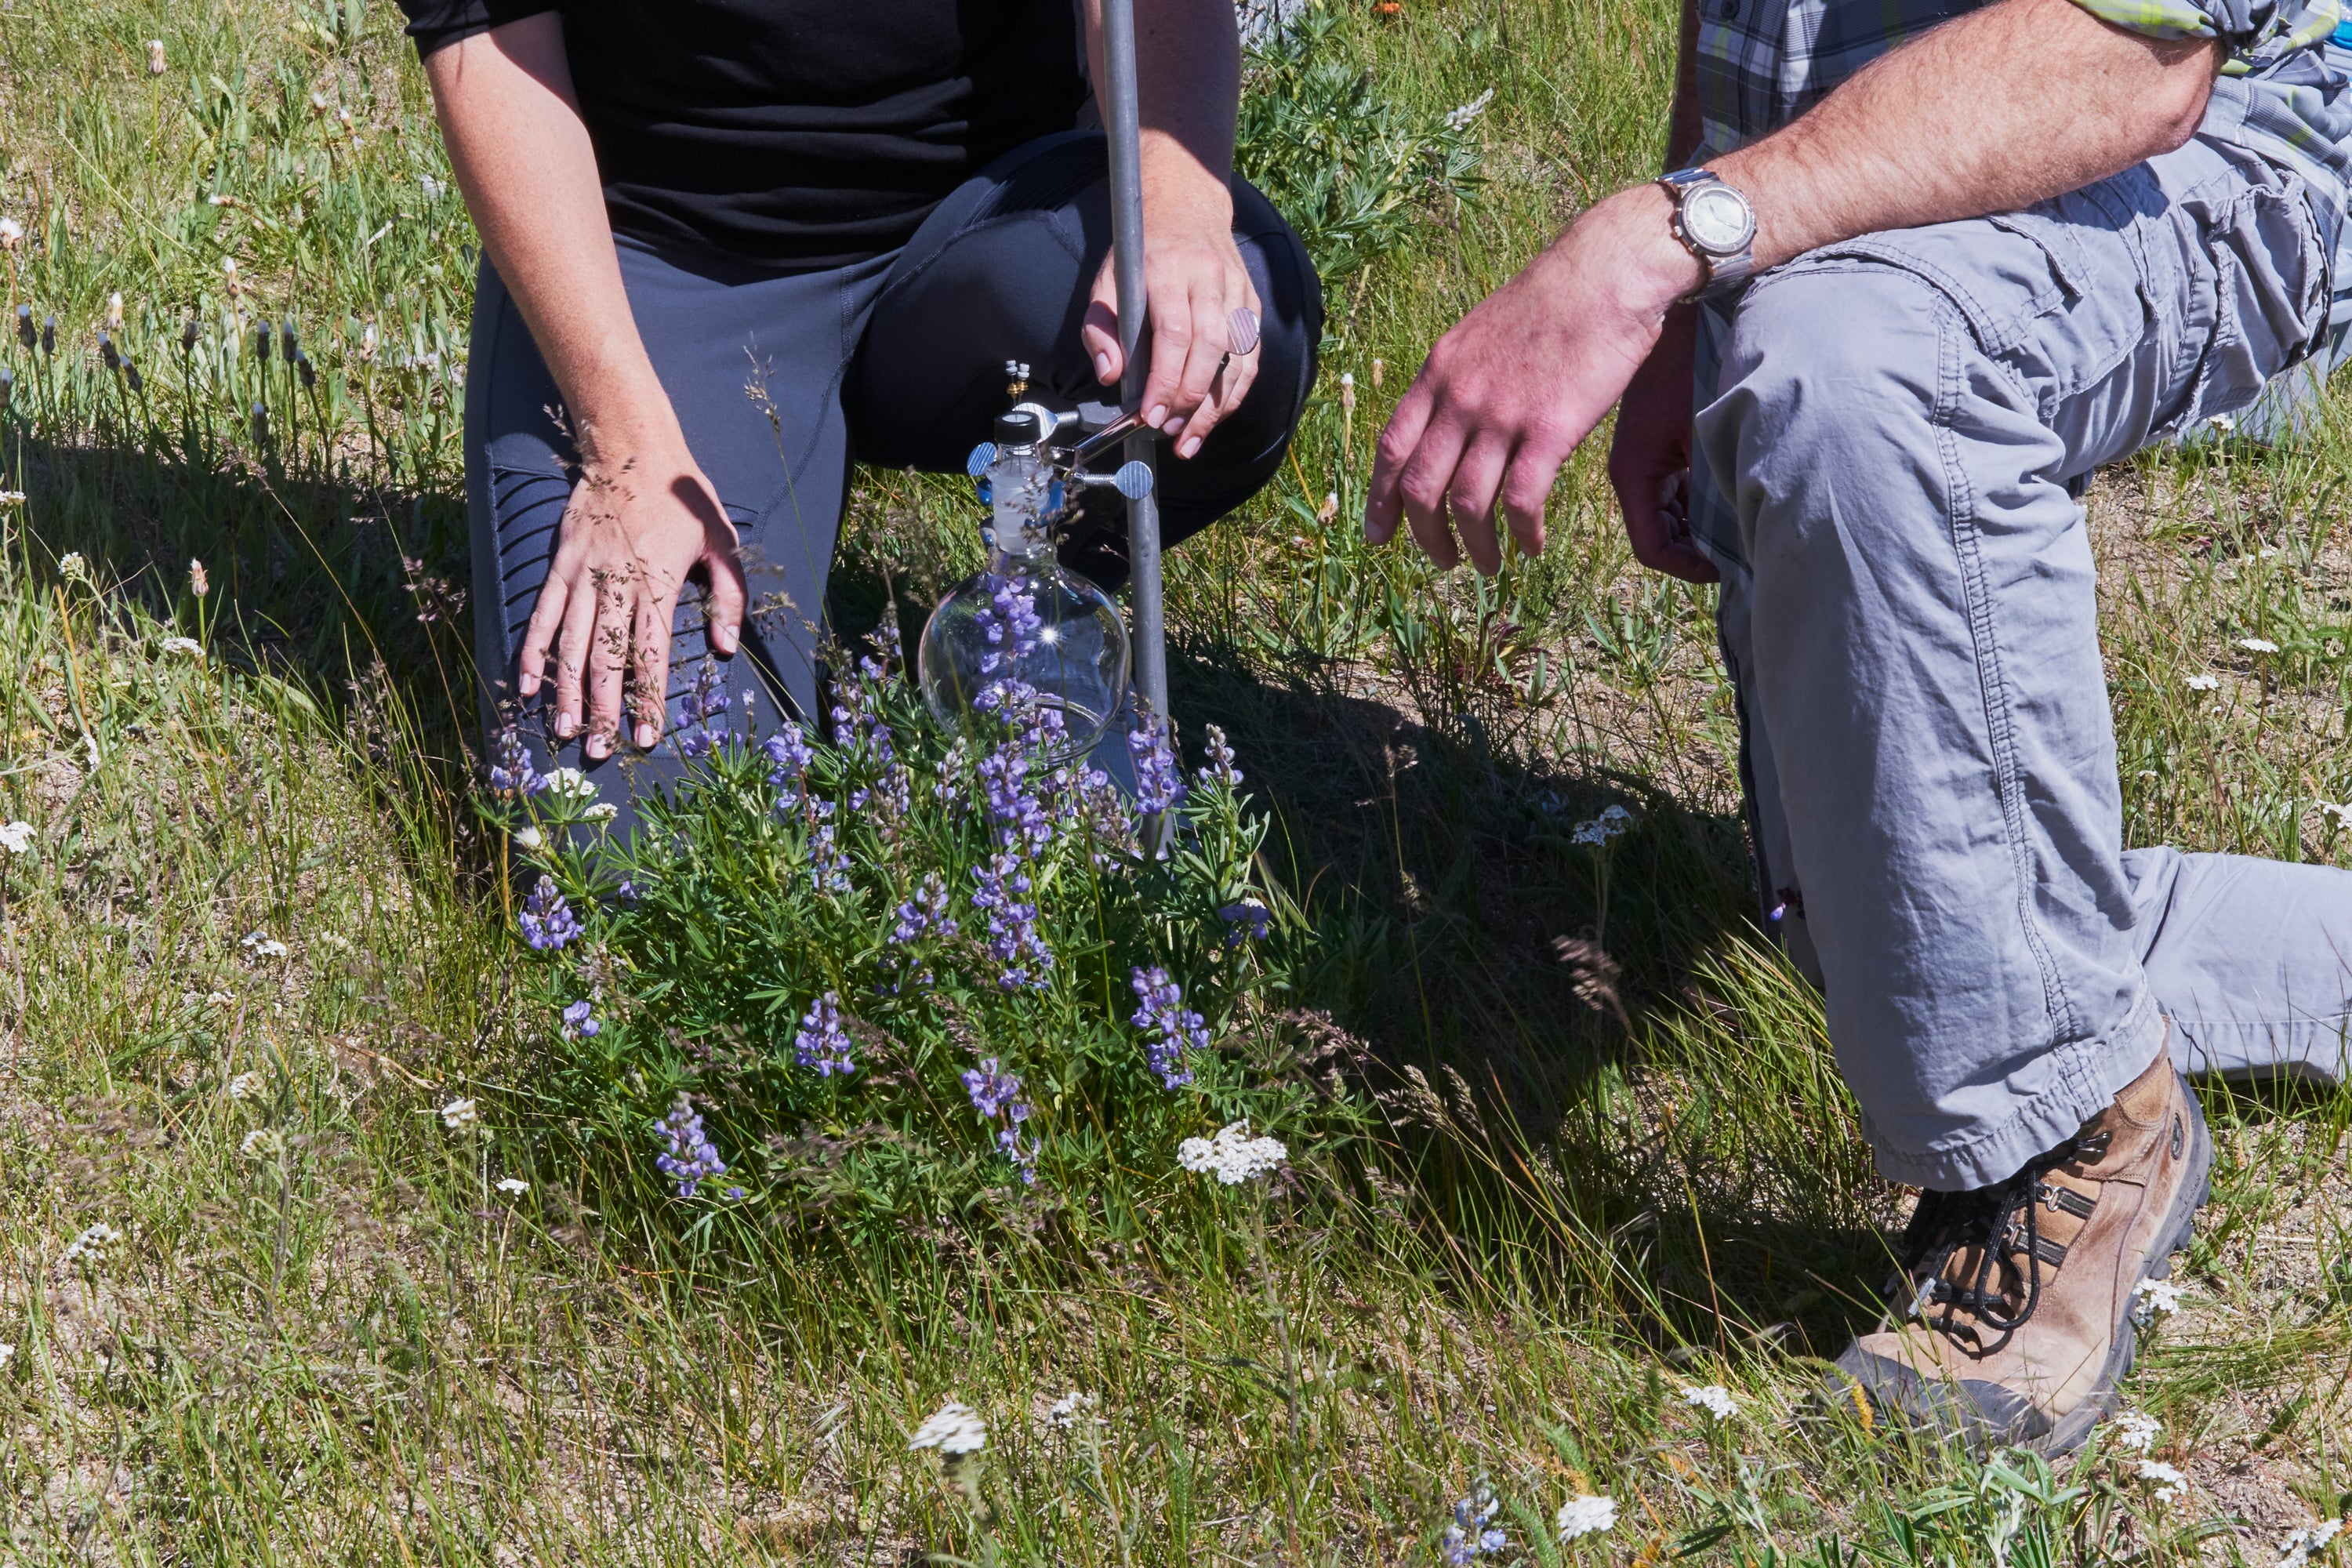 the 2019 yellowstone fragrance capture. Two people kneeling around a glass globe placed around a purple flower to capture it's scent.